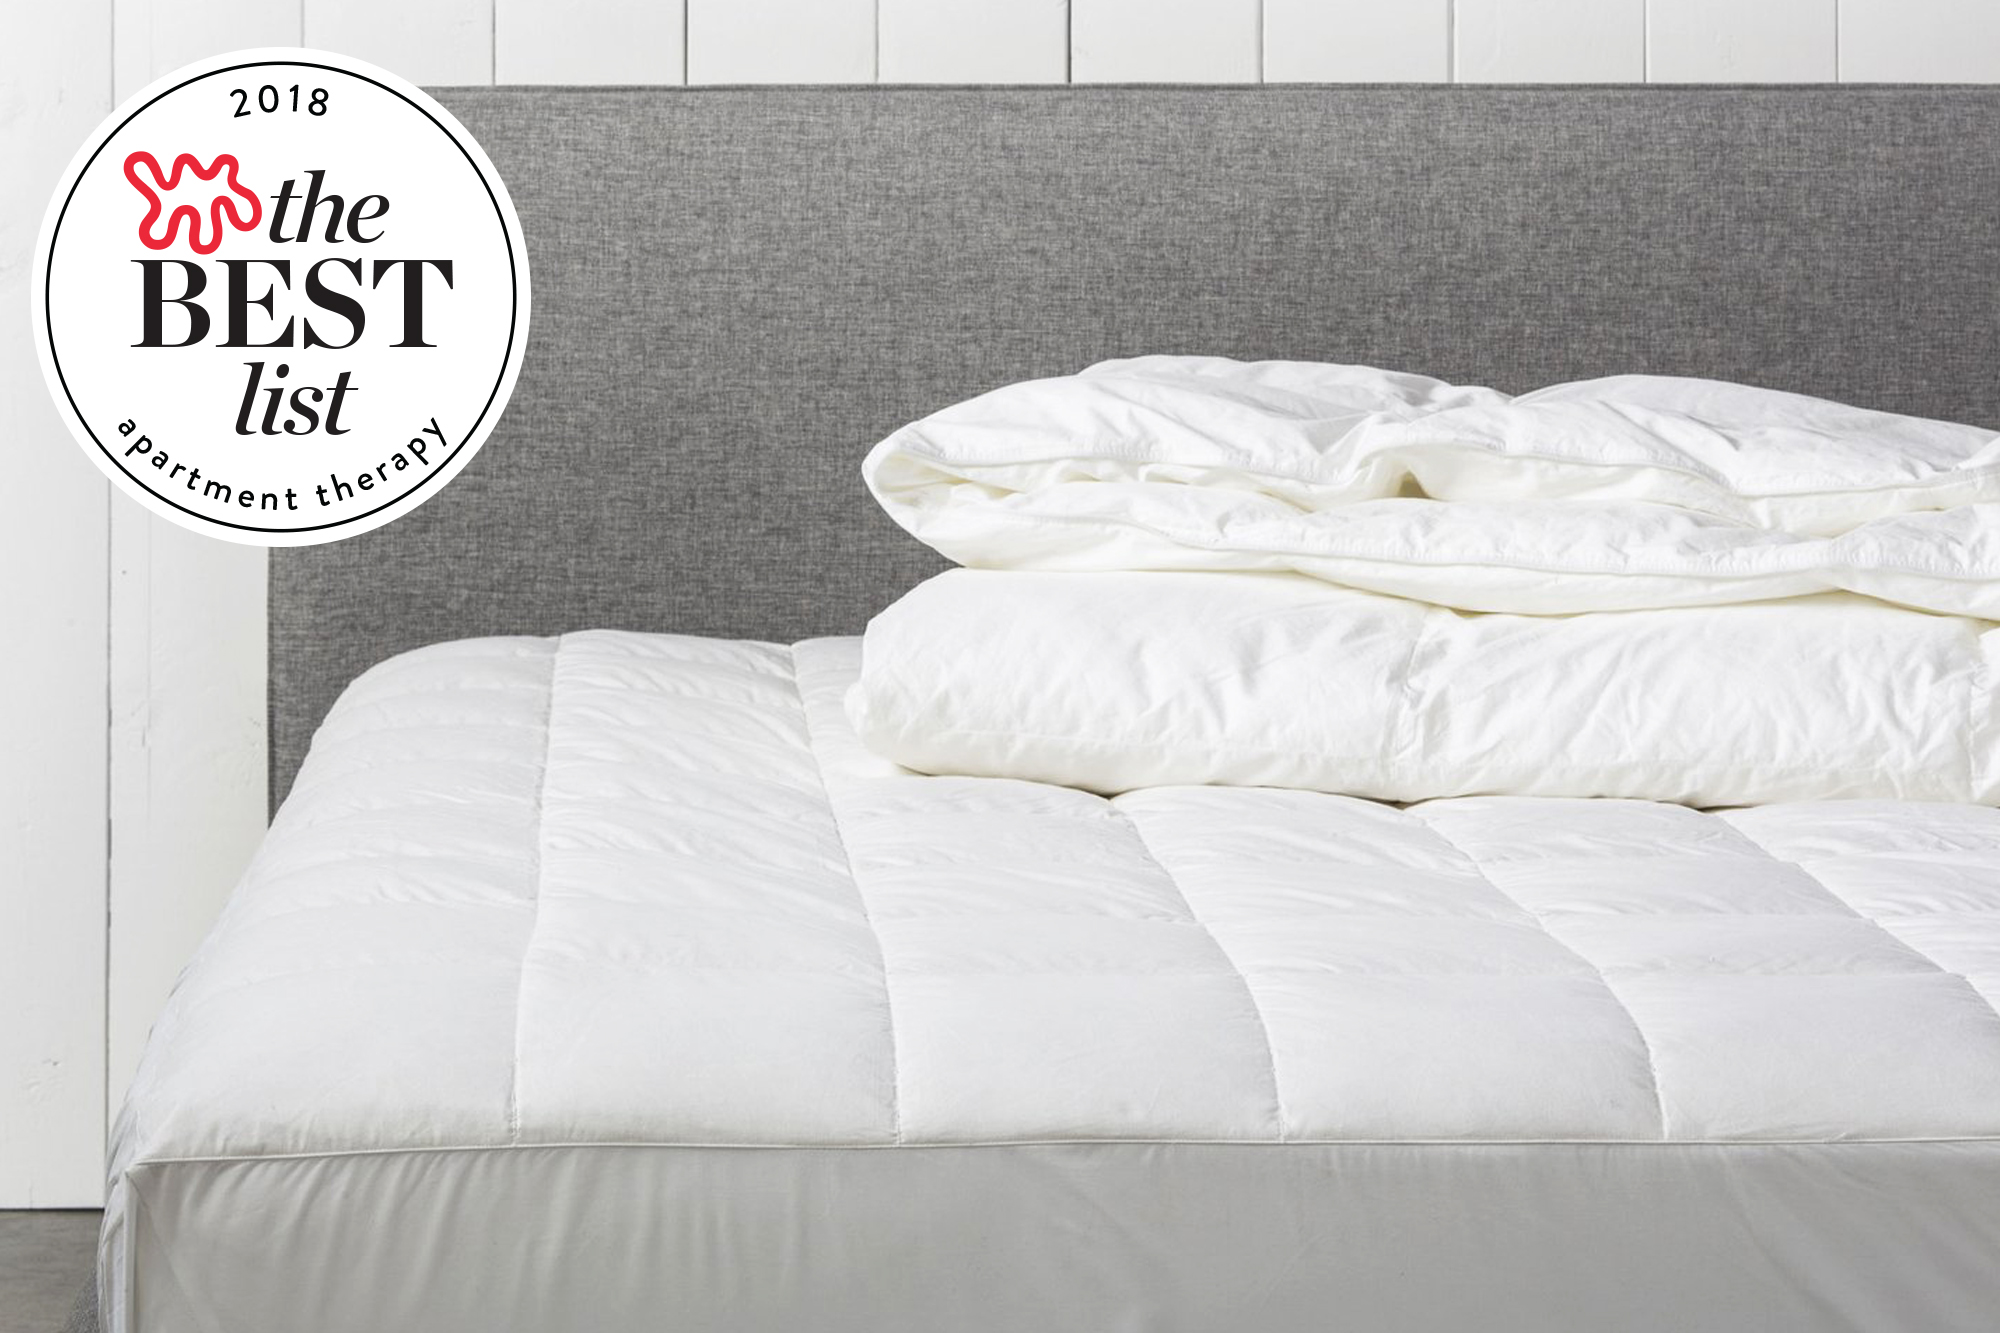 wirecutter best beds and mattresses